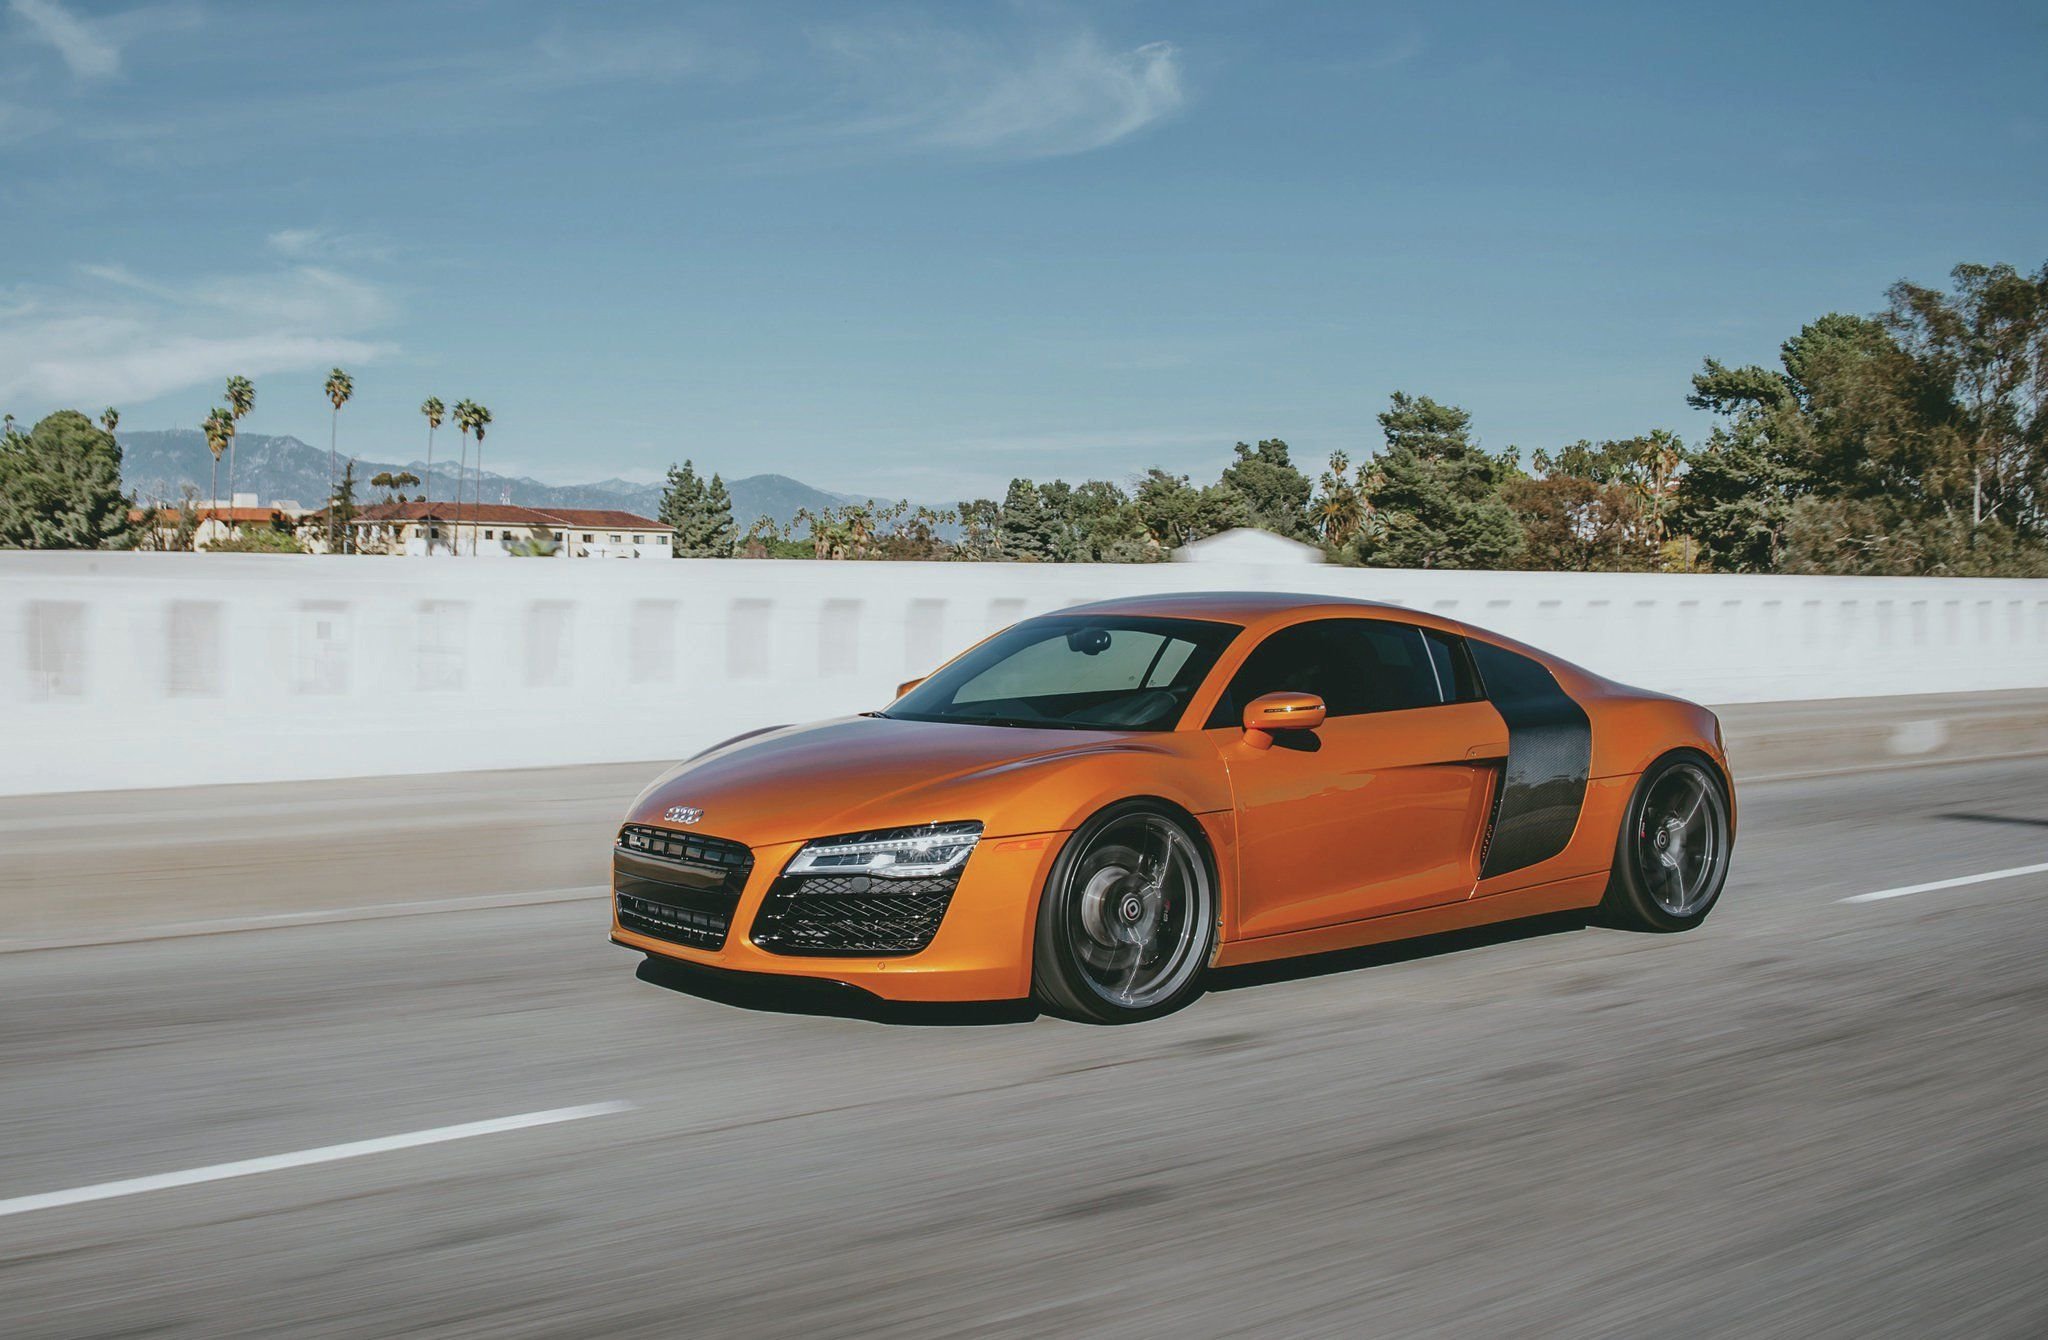 pacific, German, Audi, R8, V8, Supercharger, Coupe, Cars, Supercars, Tuning Wallpaper